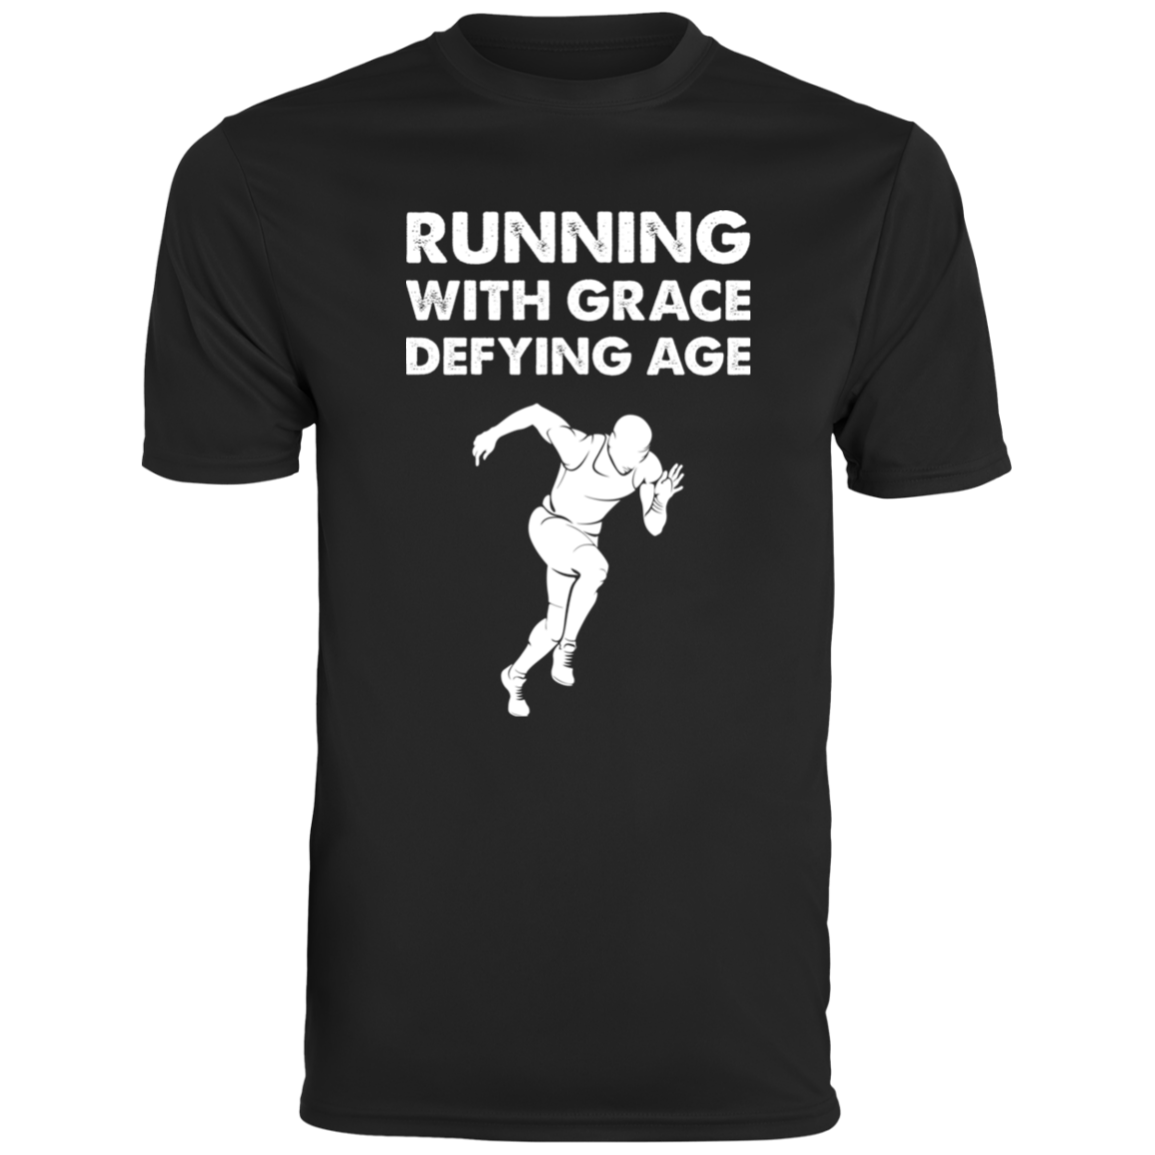 Men's Inspirational Top Running with grace, defying age